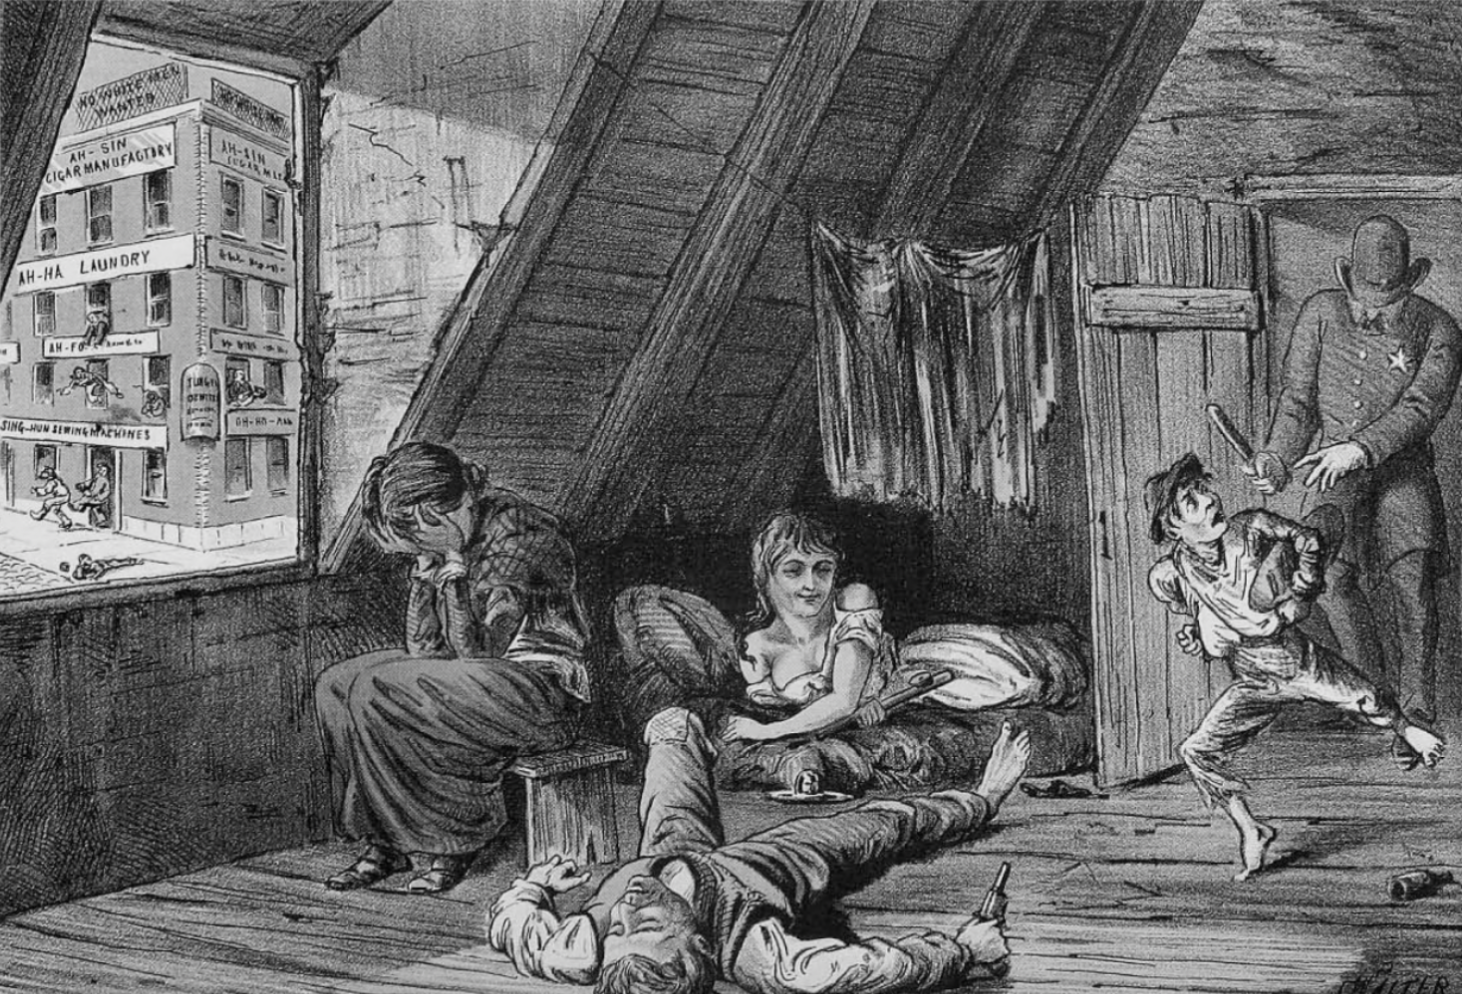 <p>Encapsulates racialisation of proletarian labour through creation of coolie labour. Seen in a lithograph that shows a white worker’s family deteriorating (drunk, prostitute, thievery) with a prosperous building with stereotyped names and caricatures of Chinese people. Call to Irish people to join white working class movement against Chinese workers. Concept of what white workers believed the consequences of coolieism were.</p>